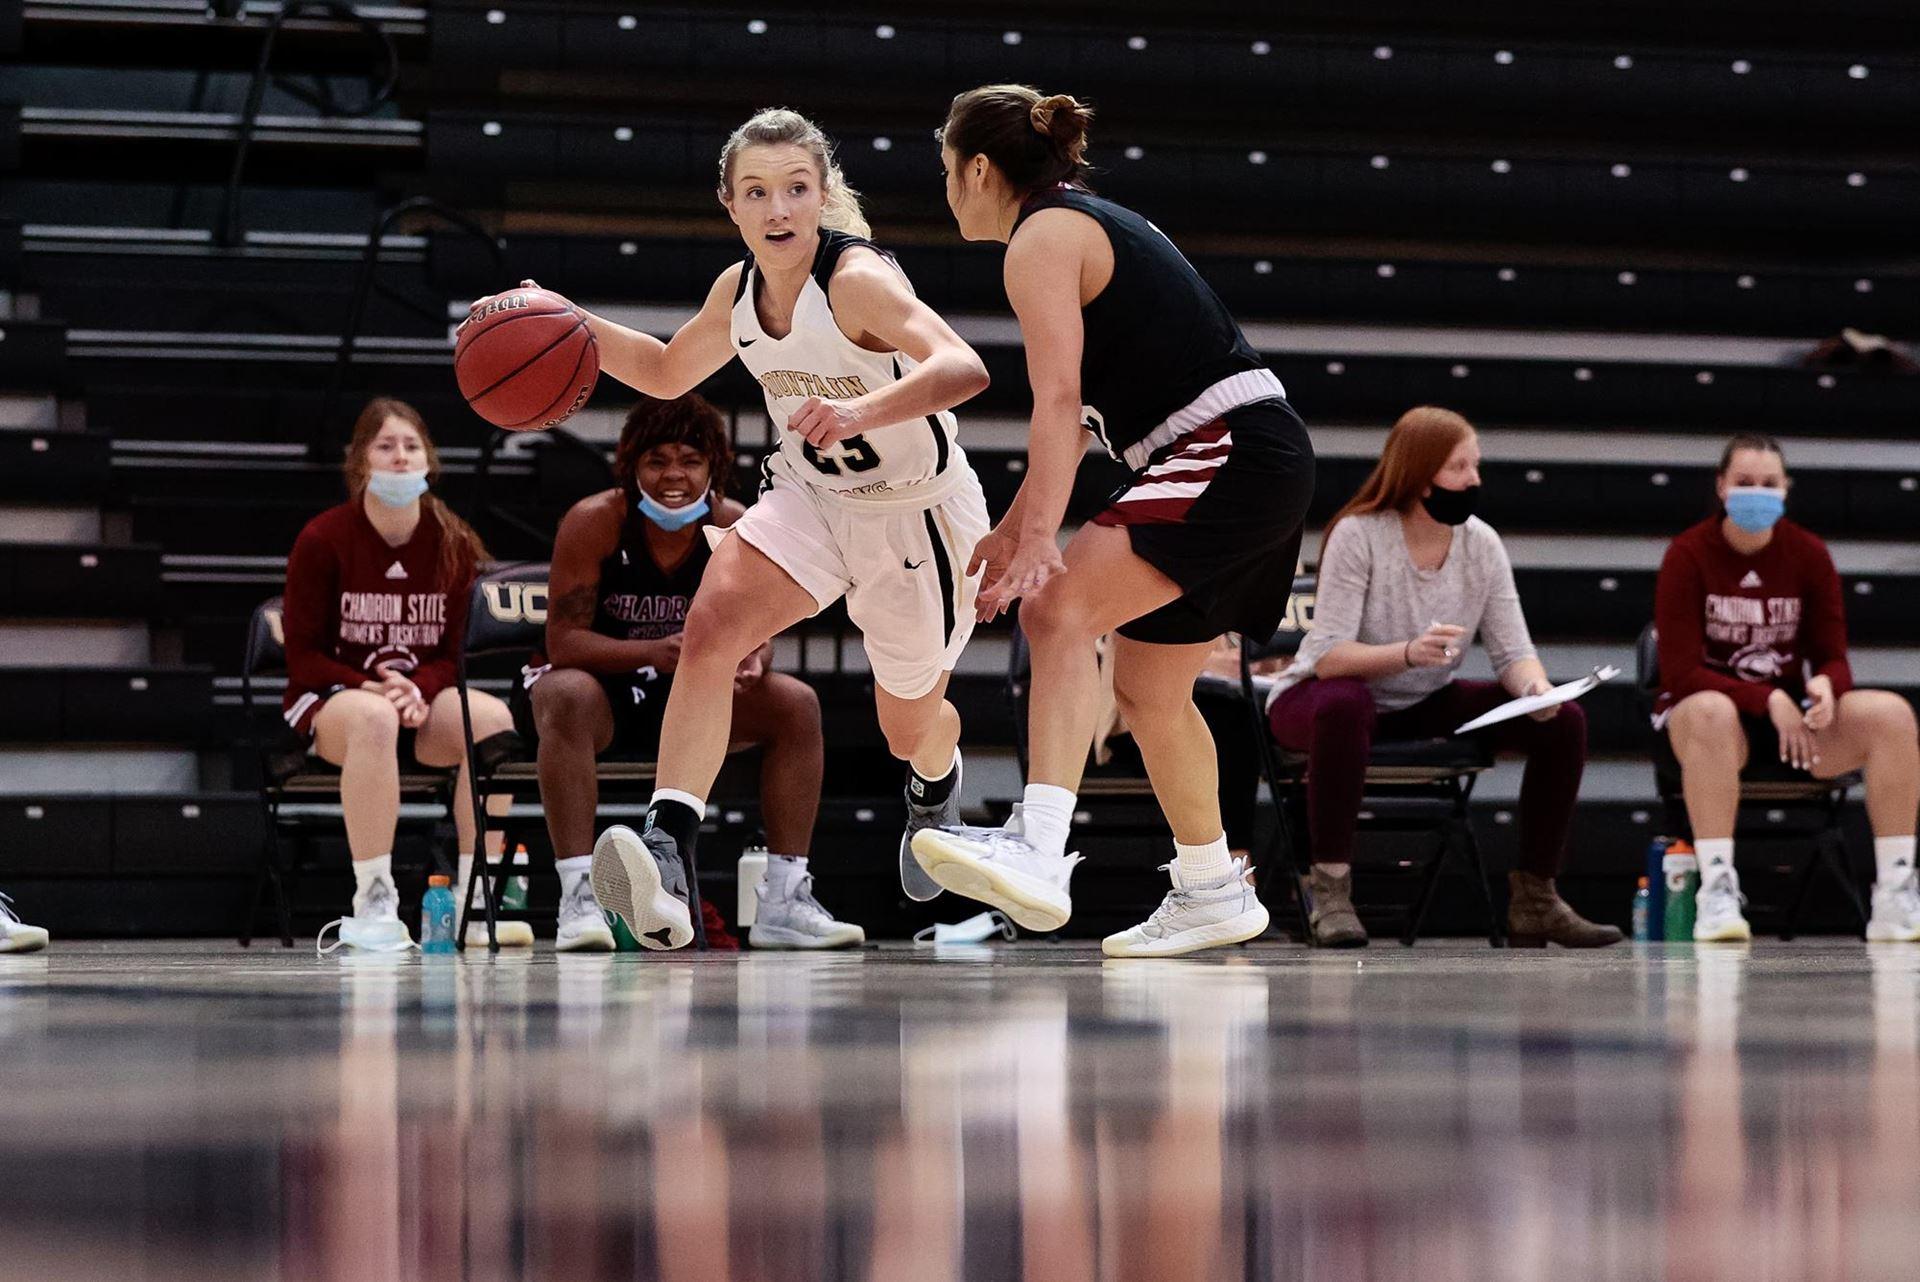 Abby Feickert dribbling the basketball against a Chadron State defender